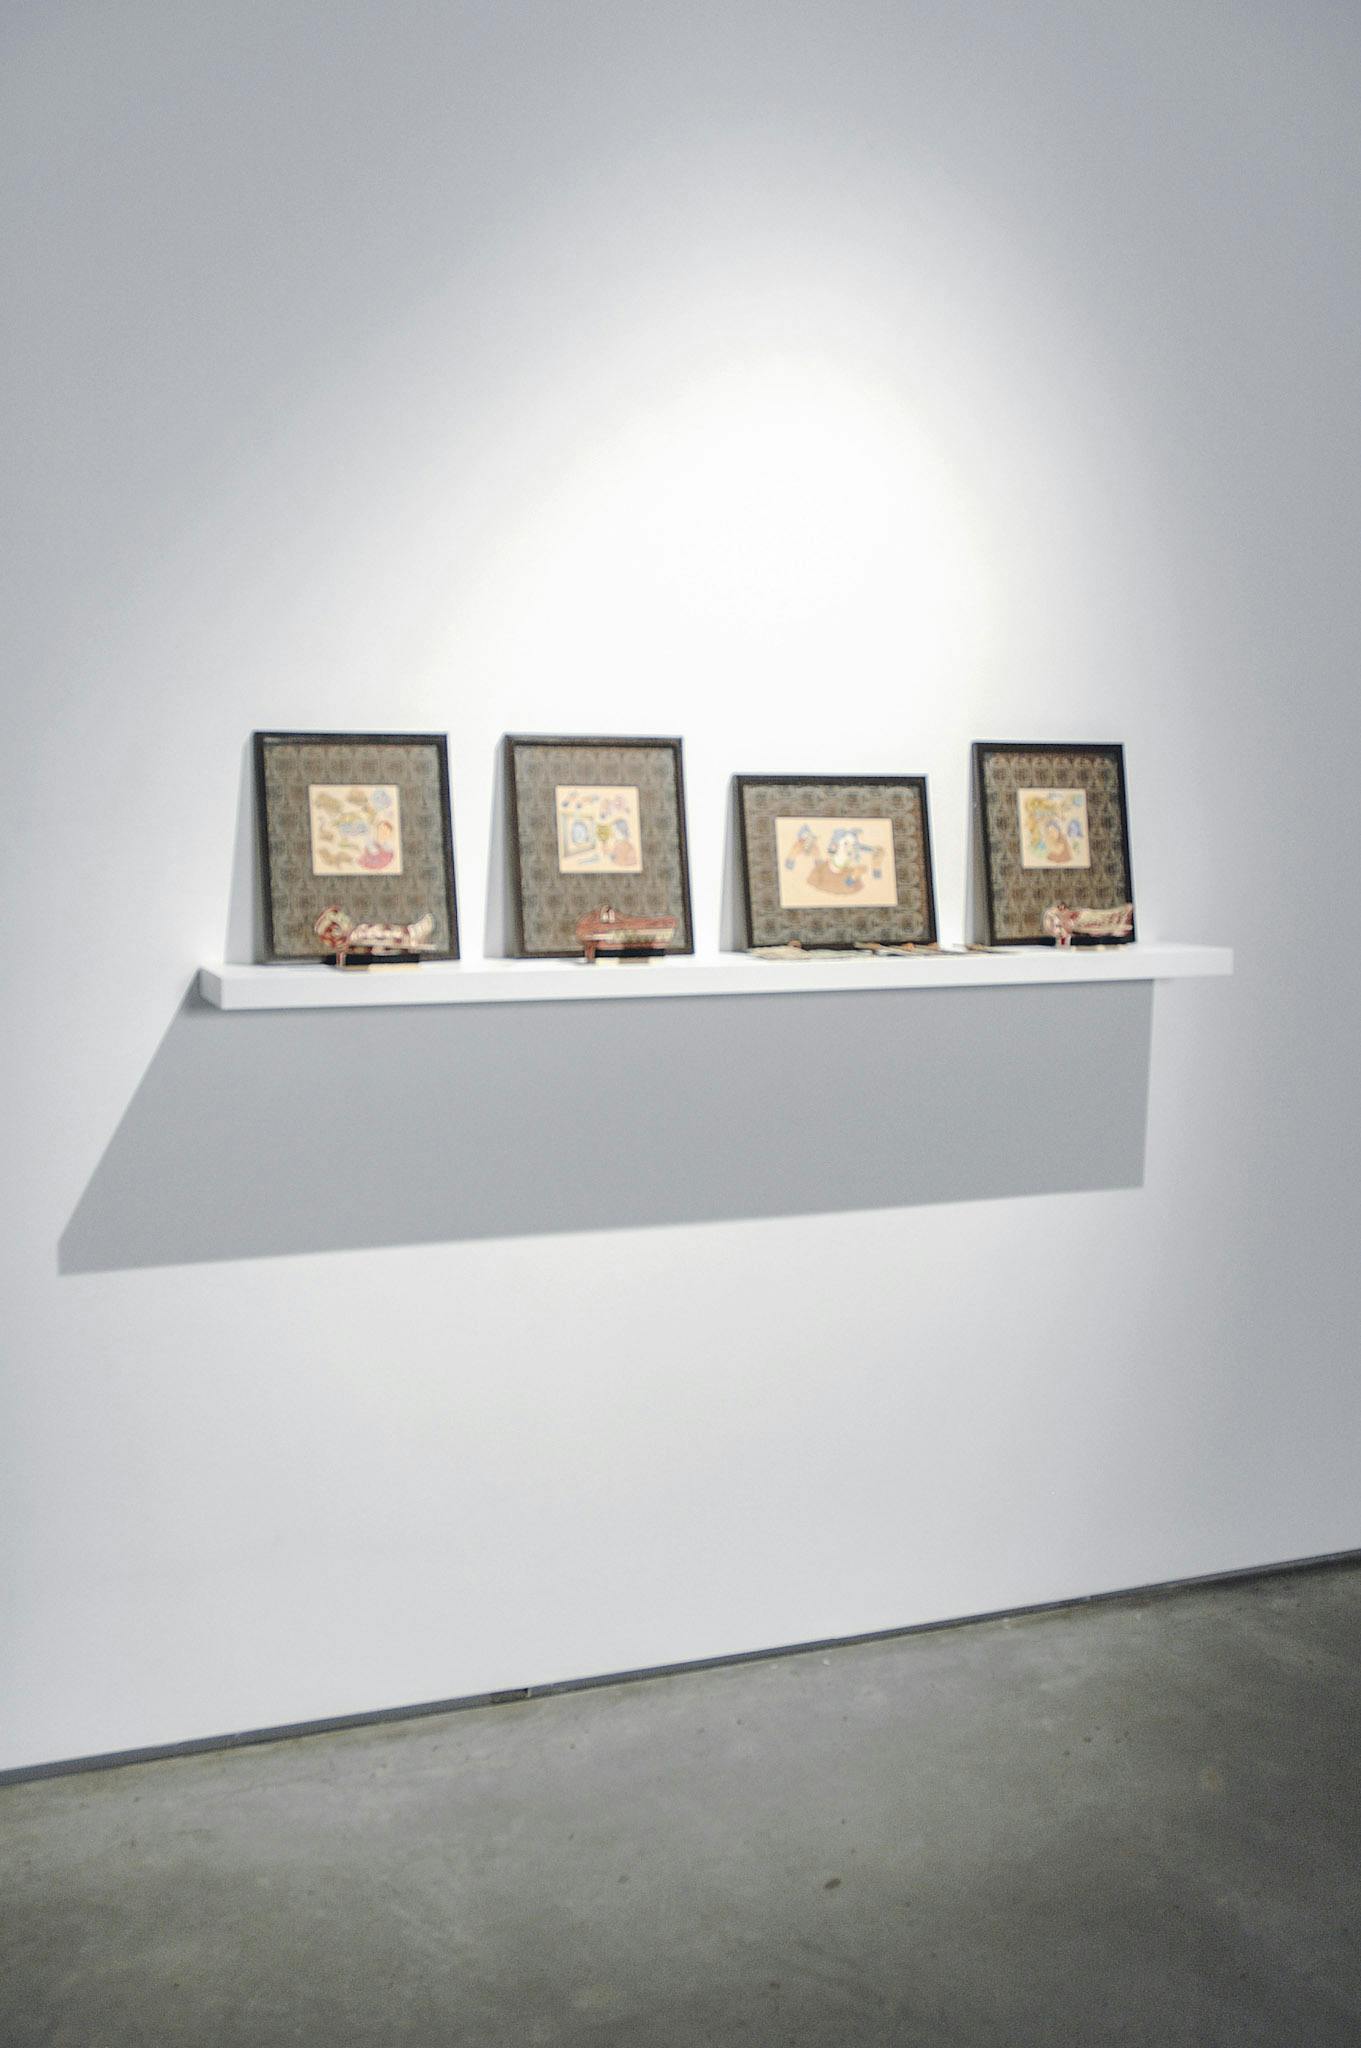 An installation image of artworks in a gallery.  Four coloured illustrations are placed on a small shelf attached to a wall. Small red sculptures of animals are placed in front of each illustration.